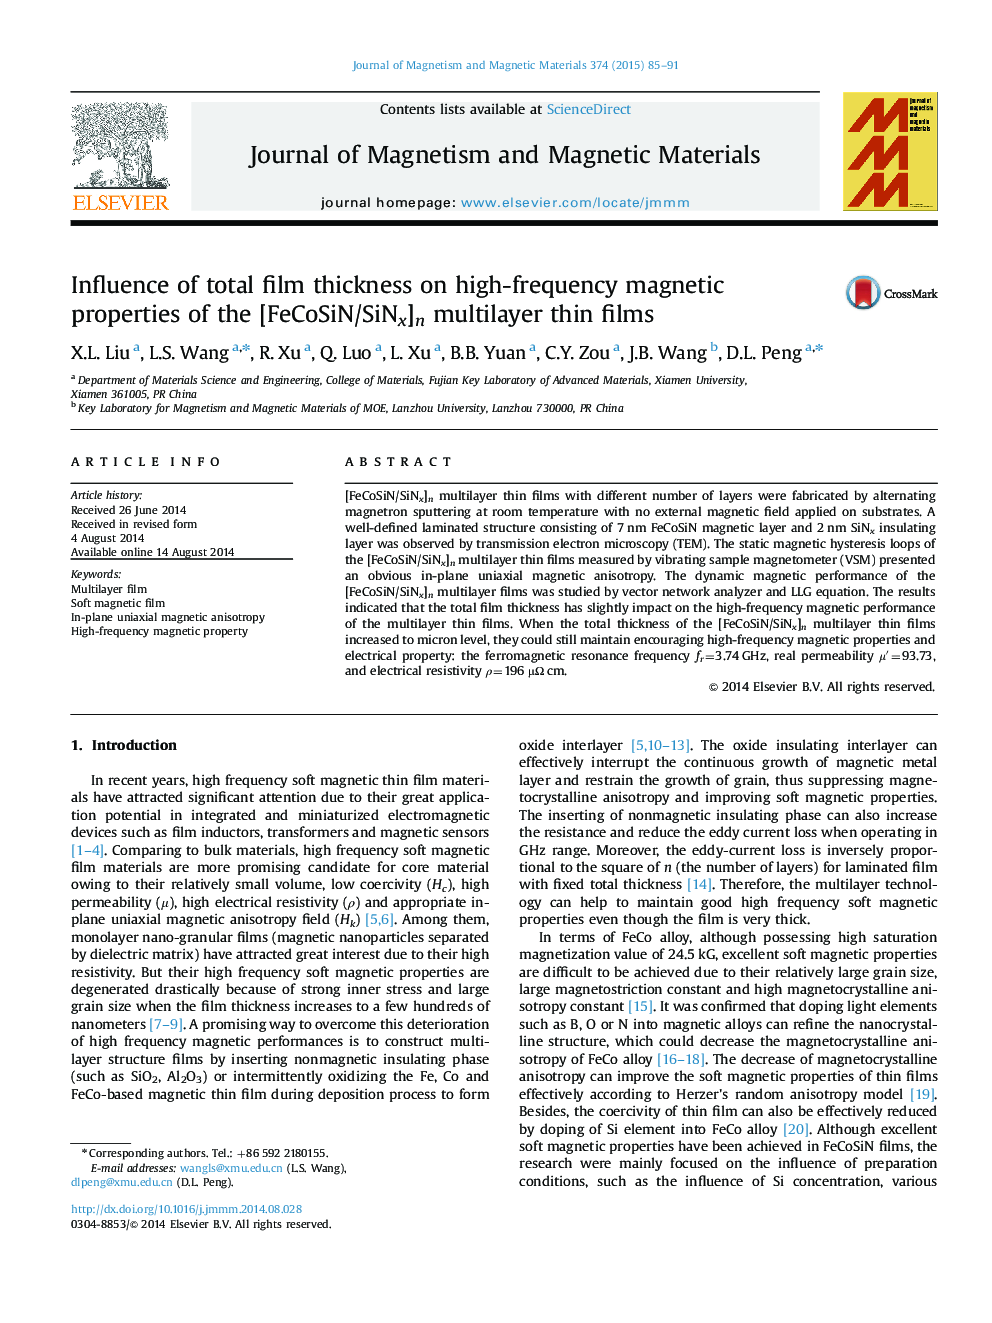 Influence of total film thickness on high-frequency magnetic properties of the [FeCoSiN/SiNx]n multilayer thin films